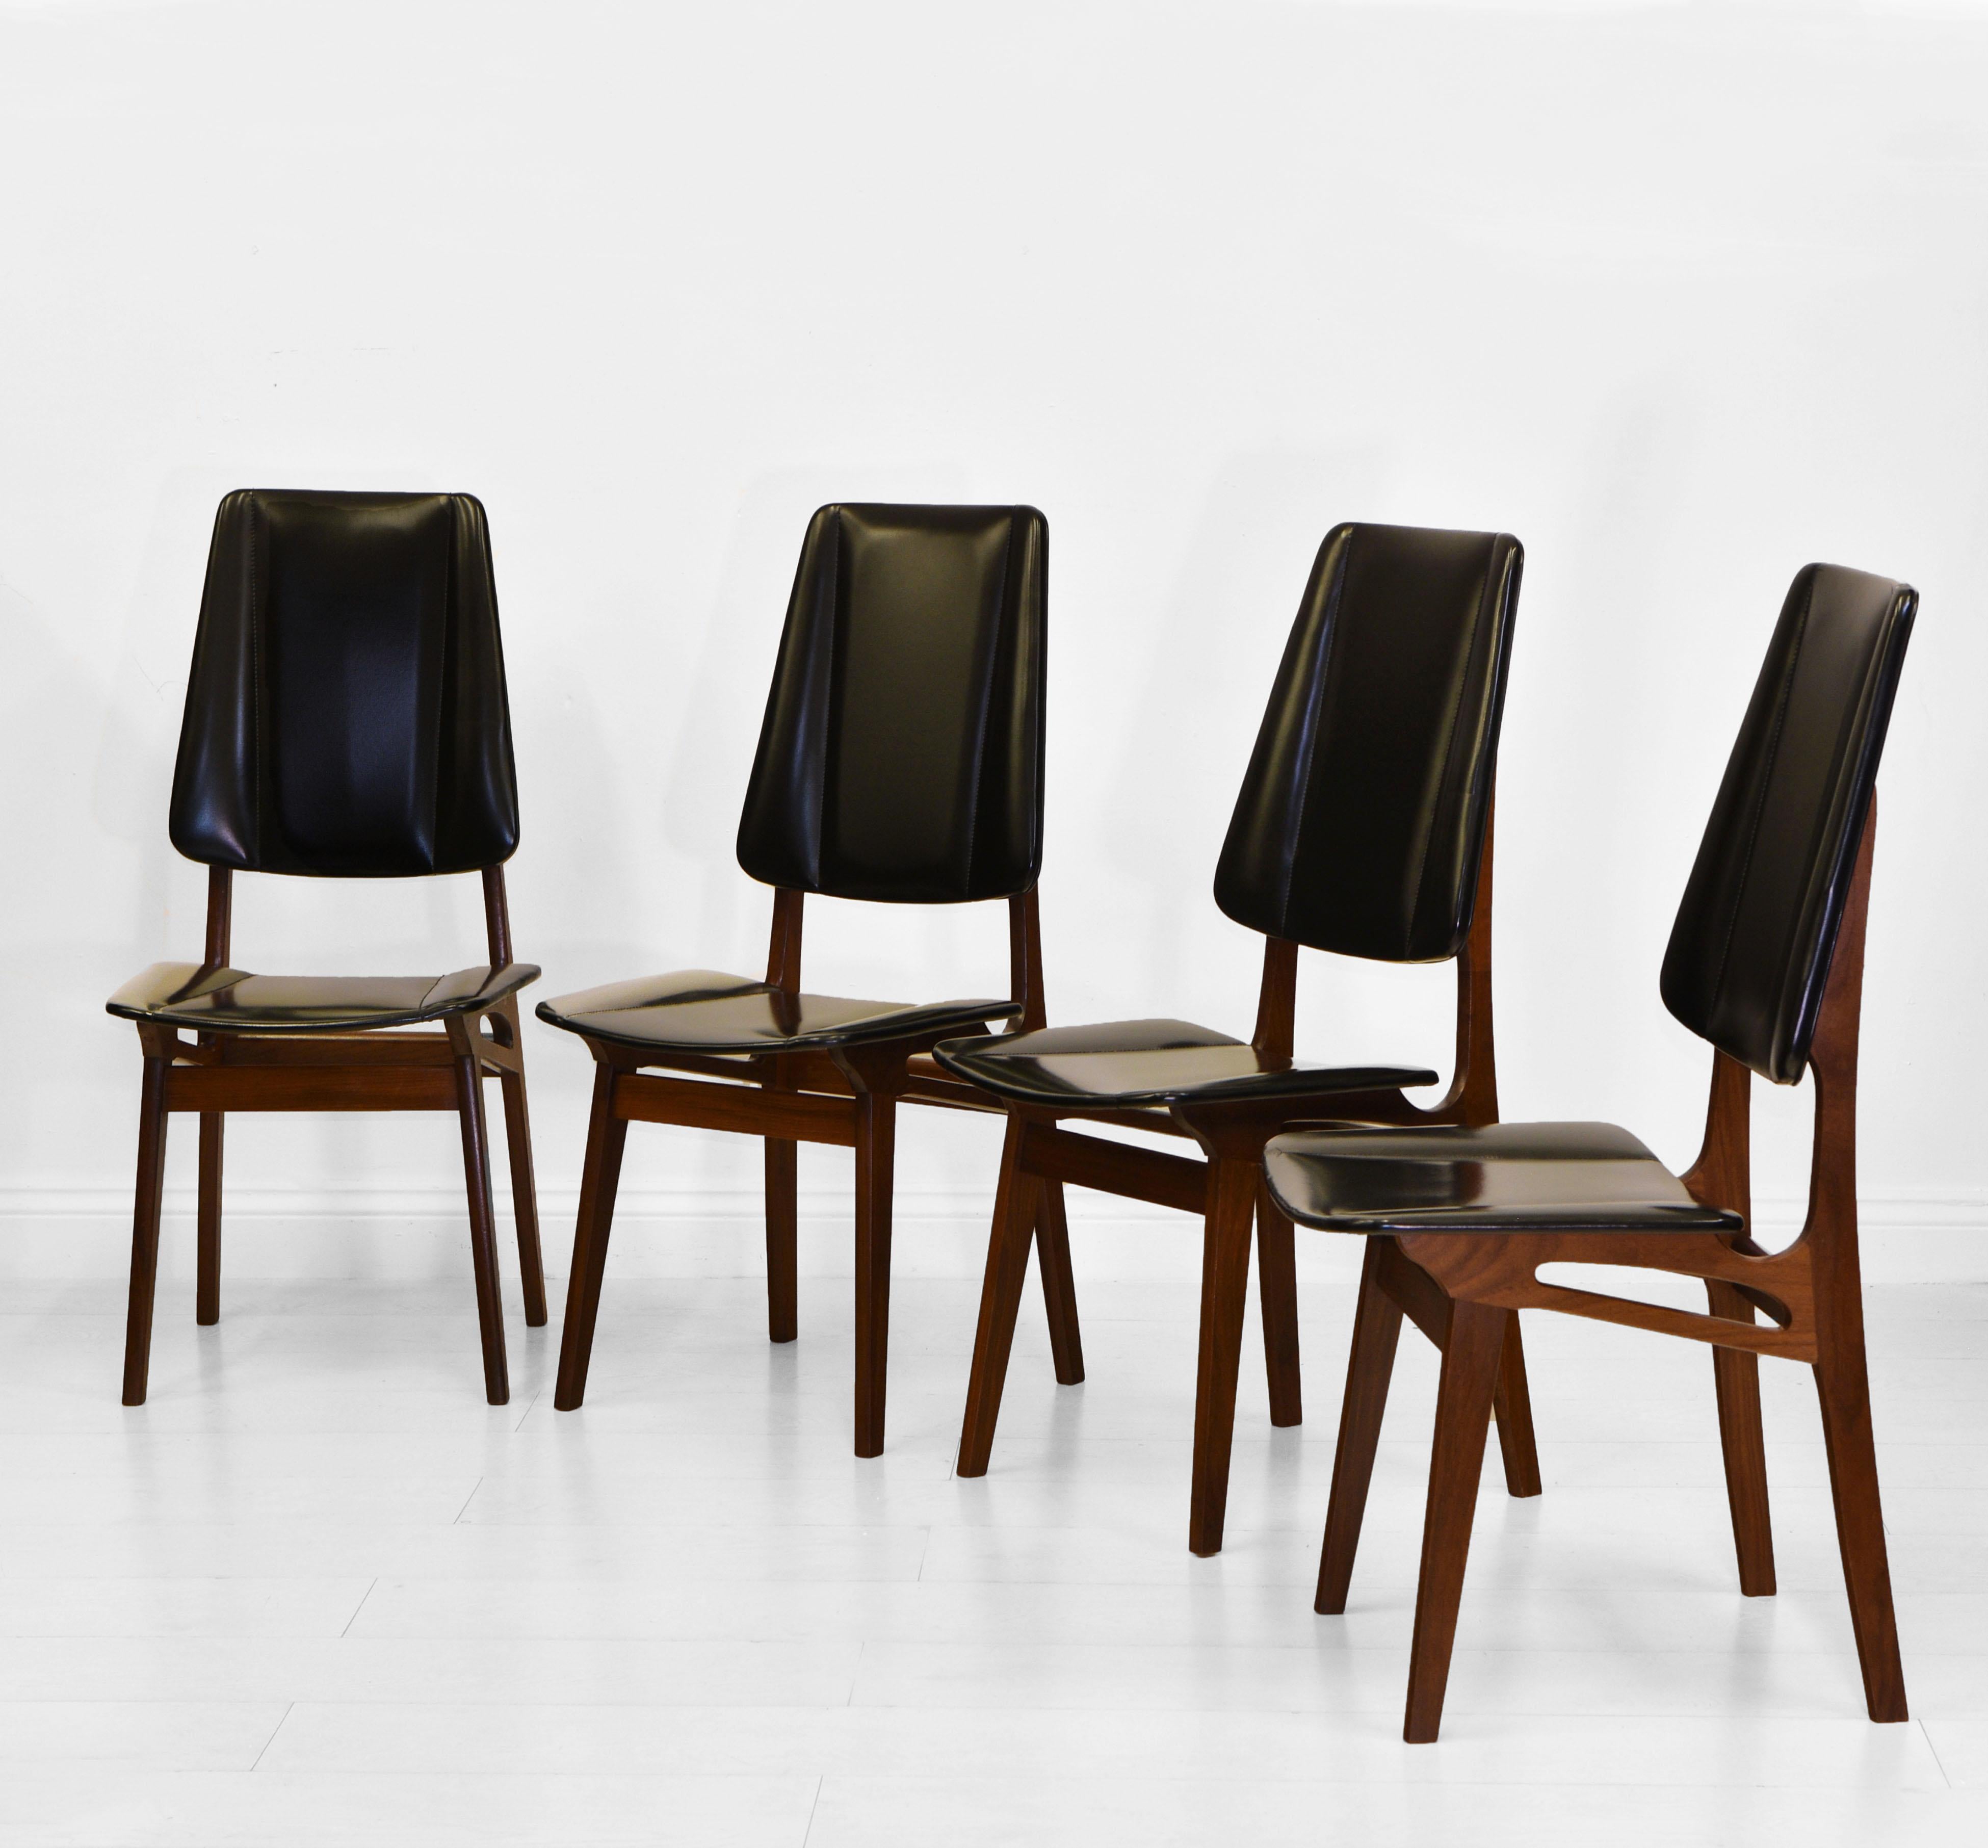 A wonderful set of four Scandinavian mid century teak and black vinyl high back dining chairs by Brødrene Sörheim - Norway. Circa 1960's. Maker's stamps.

The chairs are made in solid teak and have a sculptural design to them, with the original